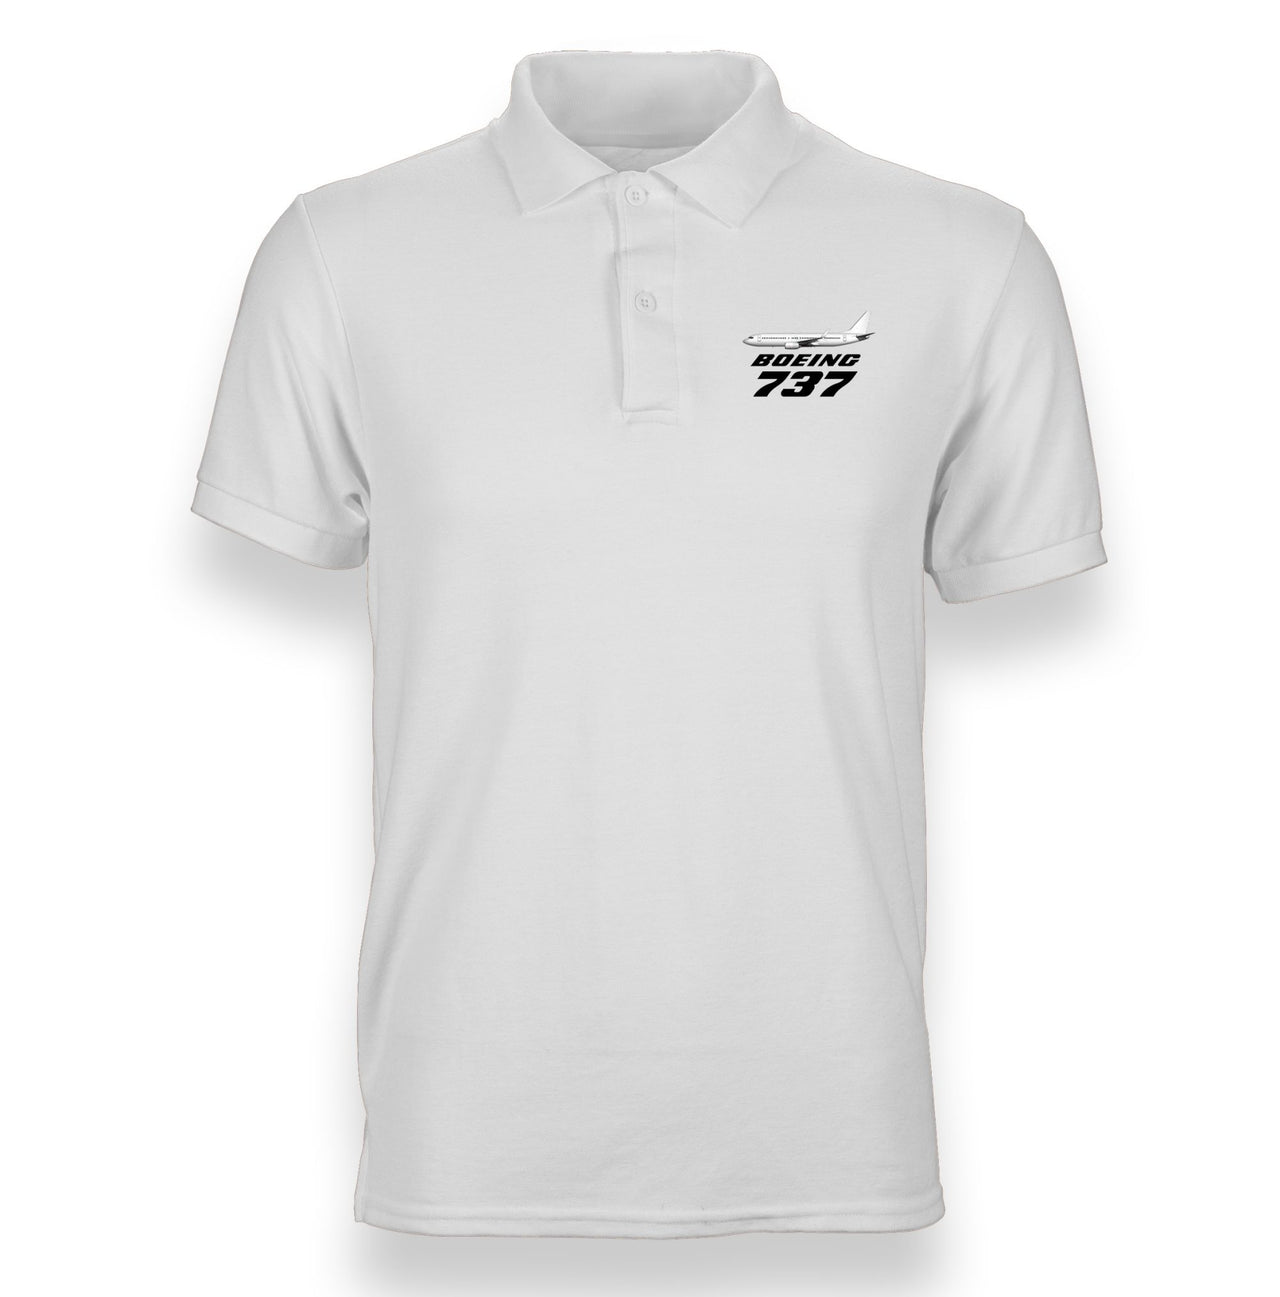 The Boeing 737 Designed "WOMEN" Polo T-Shirts